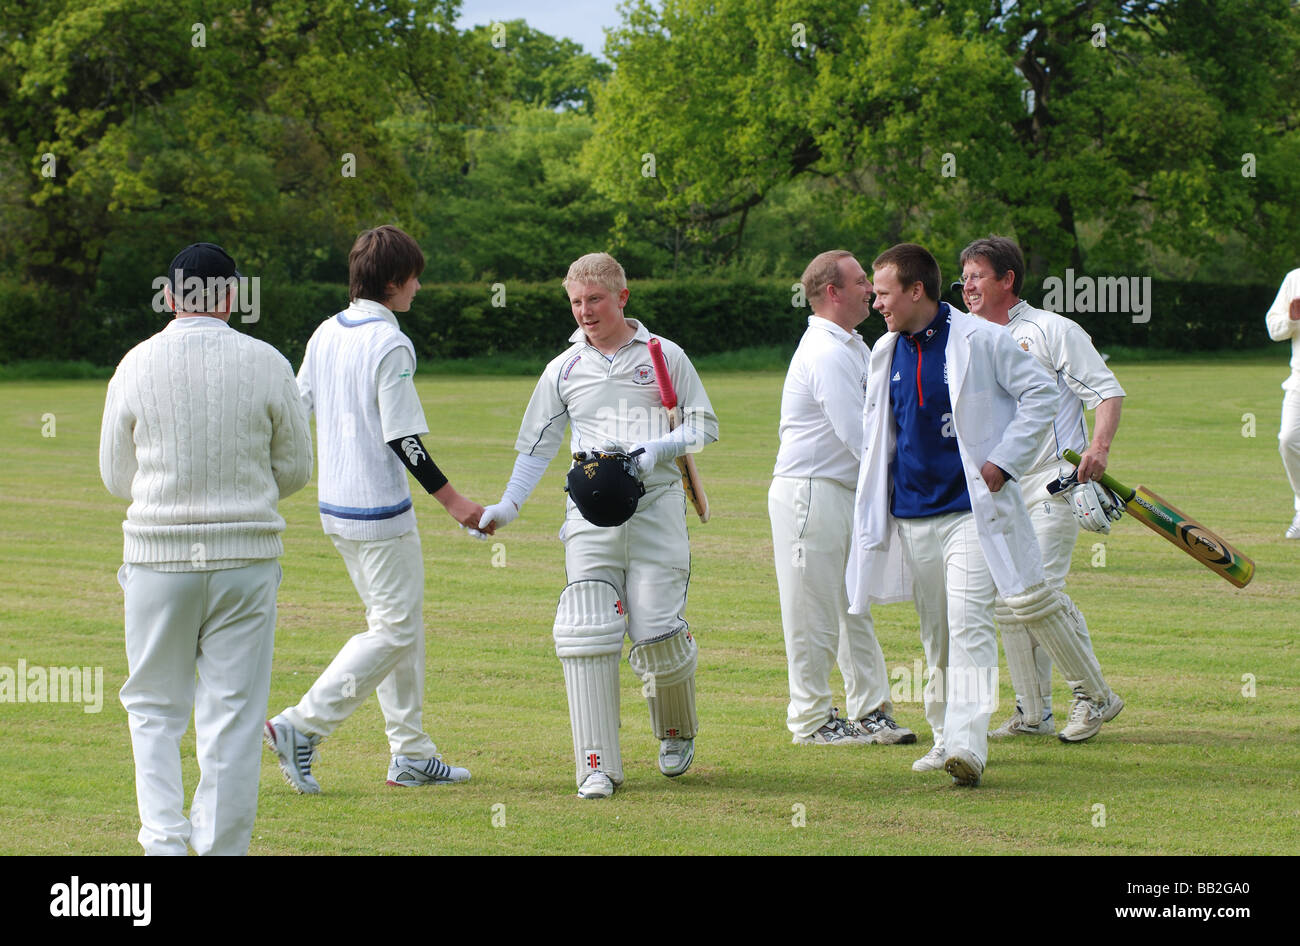 Village cricketers leaving pitch after innings, Hockley Heath, West Midlands, England, UK Stock Photo